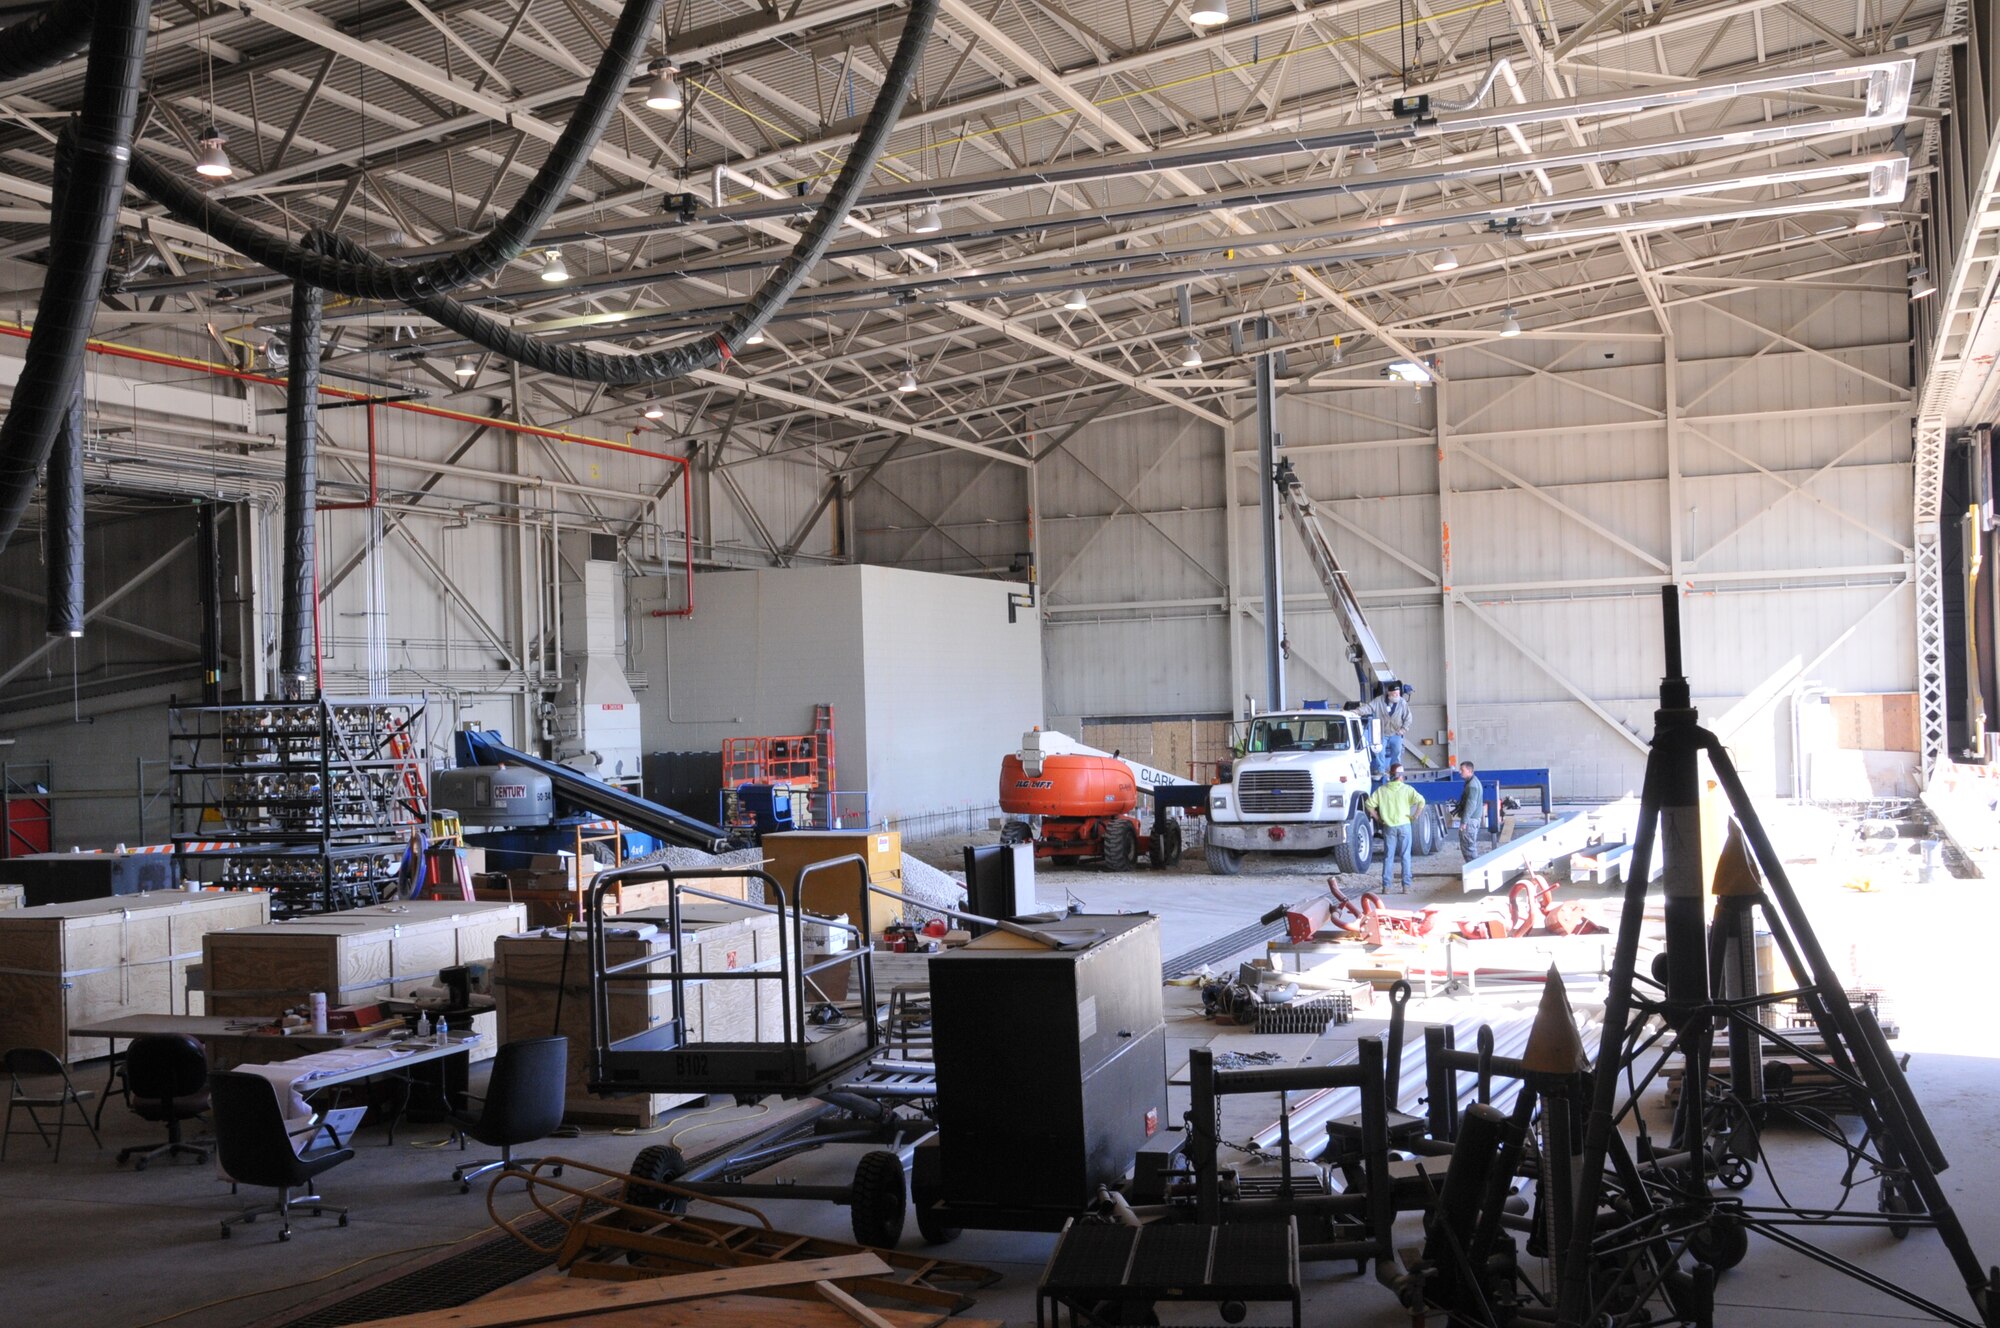 Aircraft Hangar 304 at the 171st Air Refueling Wing near Pittsburgh undergoes construction in preparation for the addition of a flight simulator April 15, 2016. (U.S. Air National Guard Photo by Staff Sgt. Ryan A. Conley)